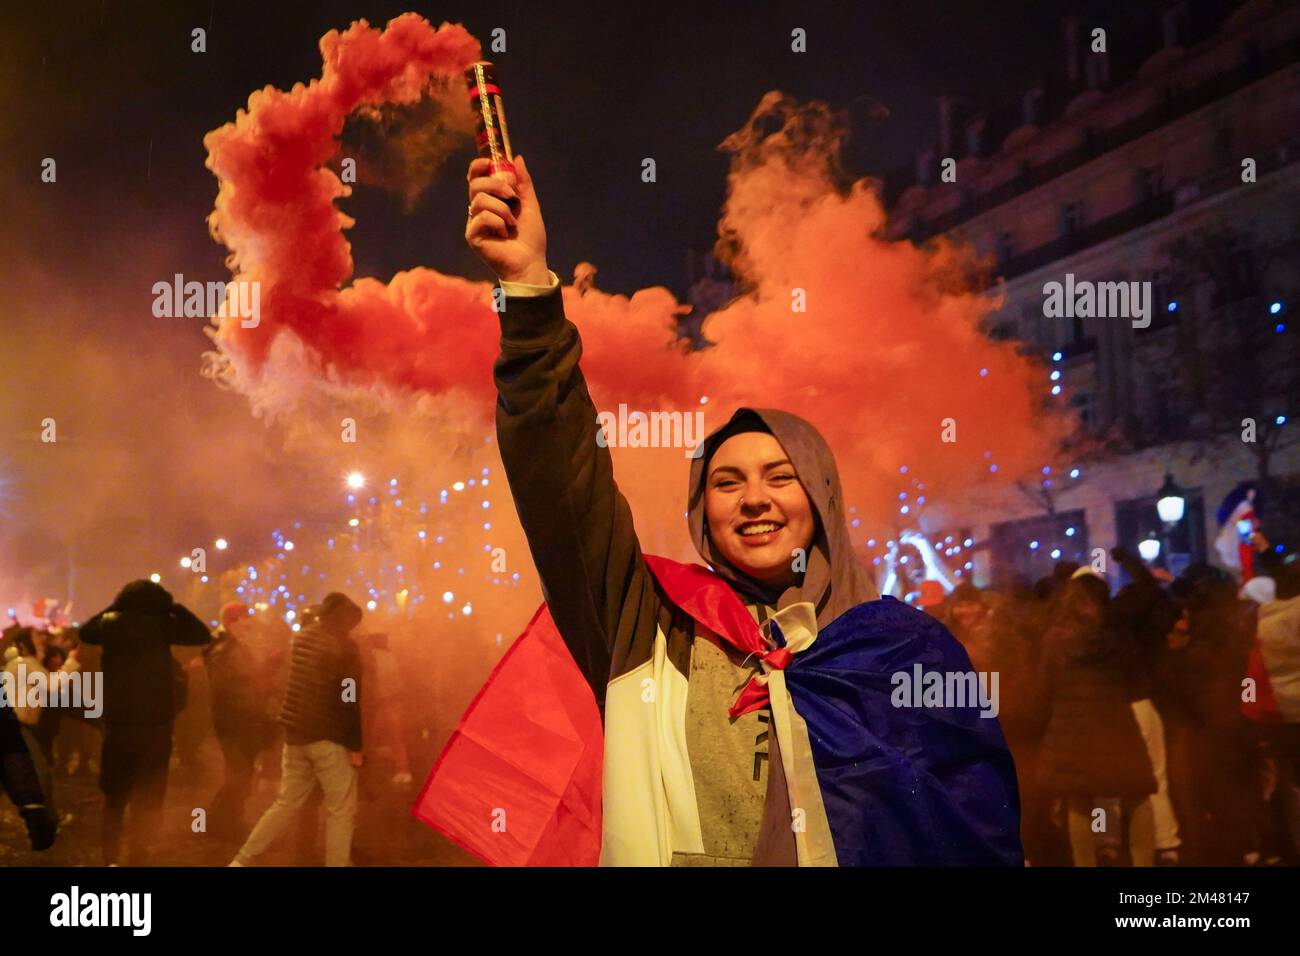 Paris, France. 19th Dec, 2022. A football fan raises a red smoke in support of the French football team. French football fans gather on the Champs Elysees, Paris, to support their national team which they play against Argentina during the final of the FIFA World Cup Qatar 2022 on December 18, 2022. Argentina ultimately is crowned as the winner after winning 4-2 in penalties even though the two teams reach a draw 3-3 in extra time. Credit: SOPA Images Limited/Alamy Live News Stock Photo